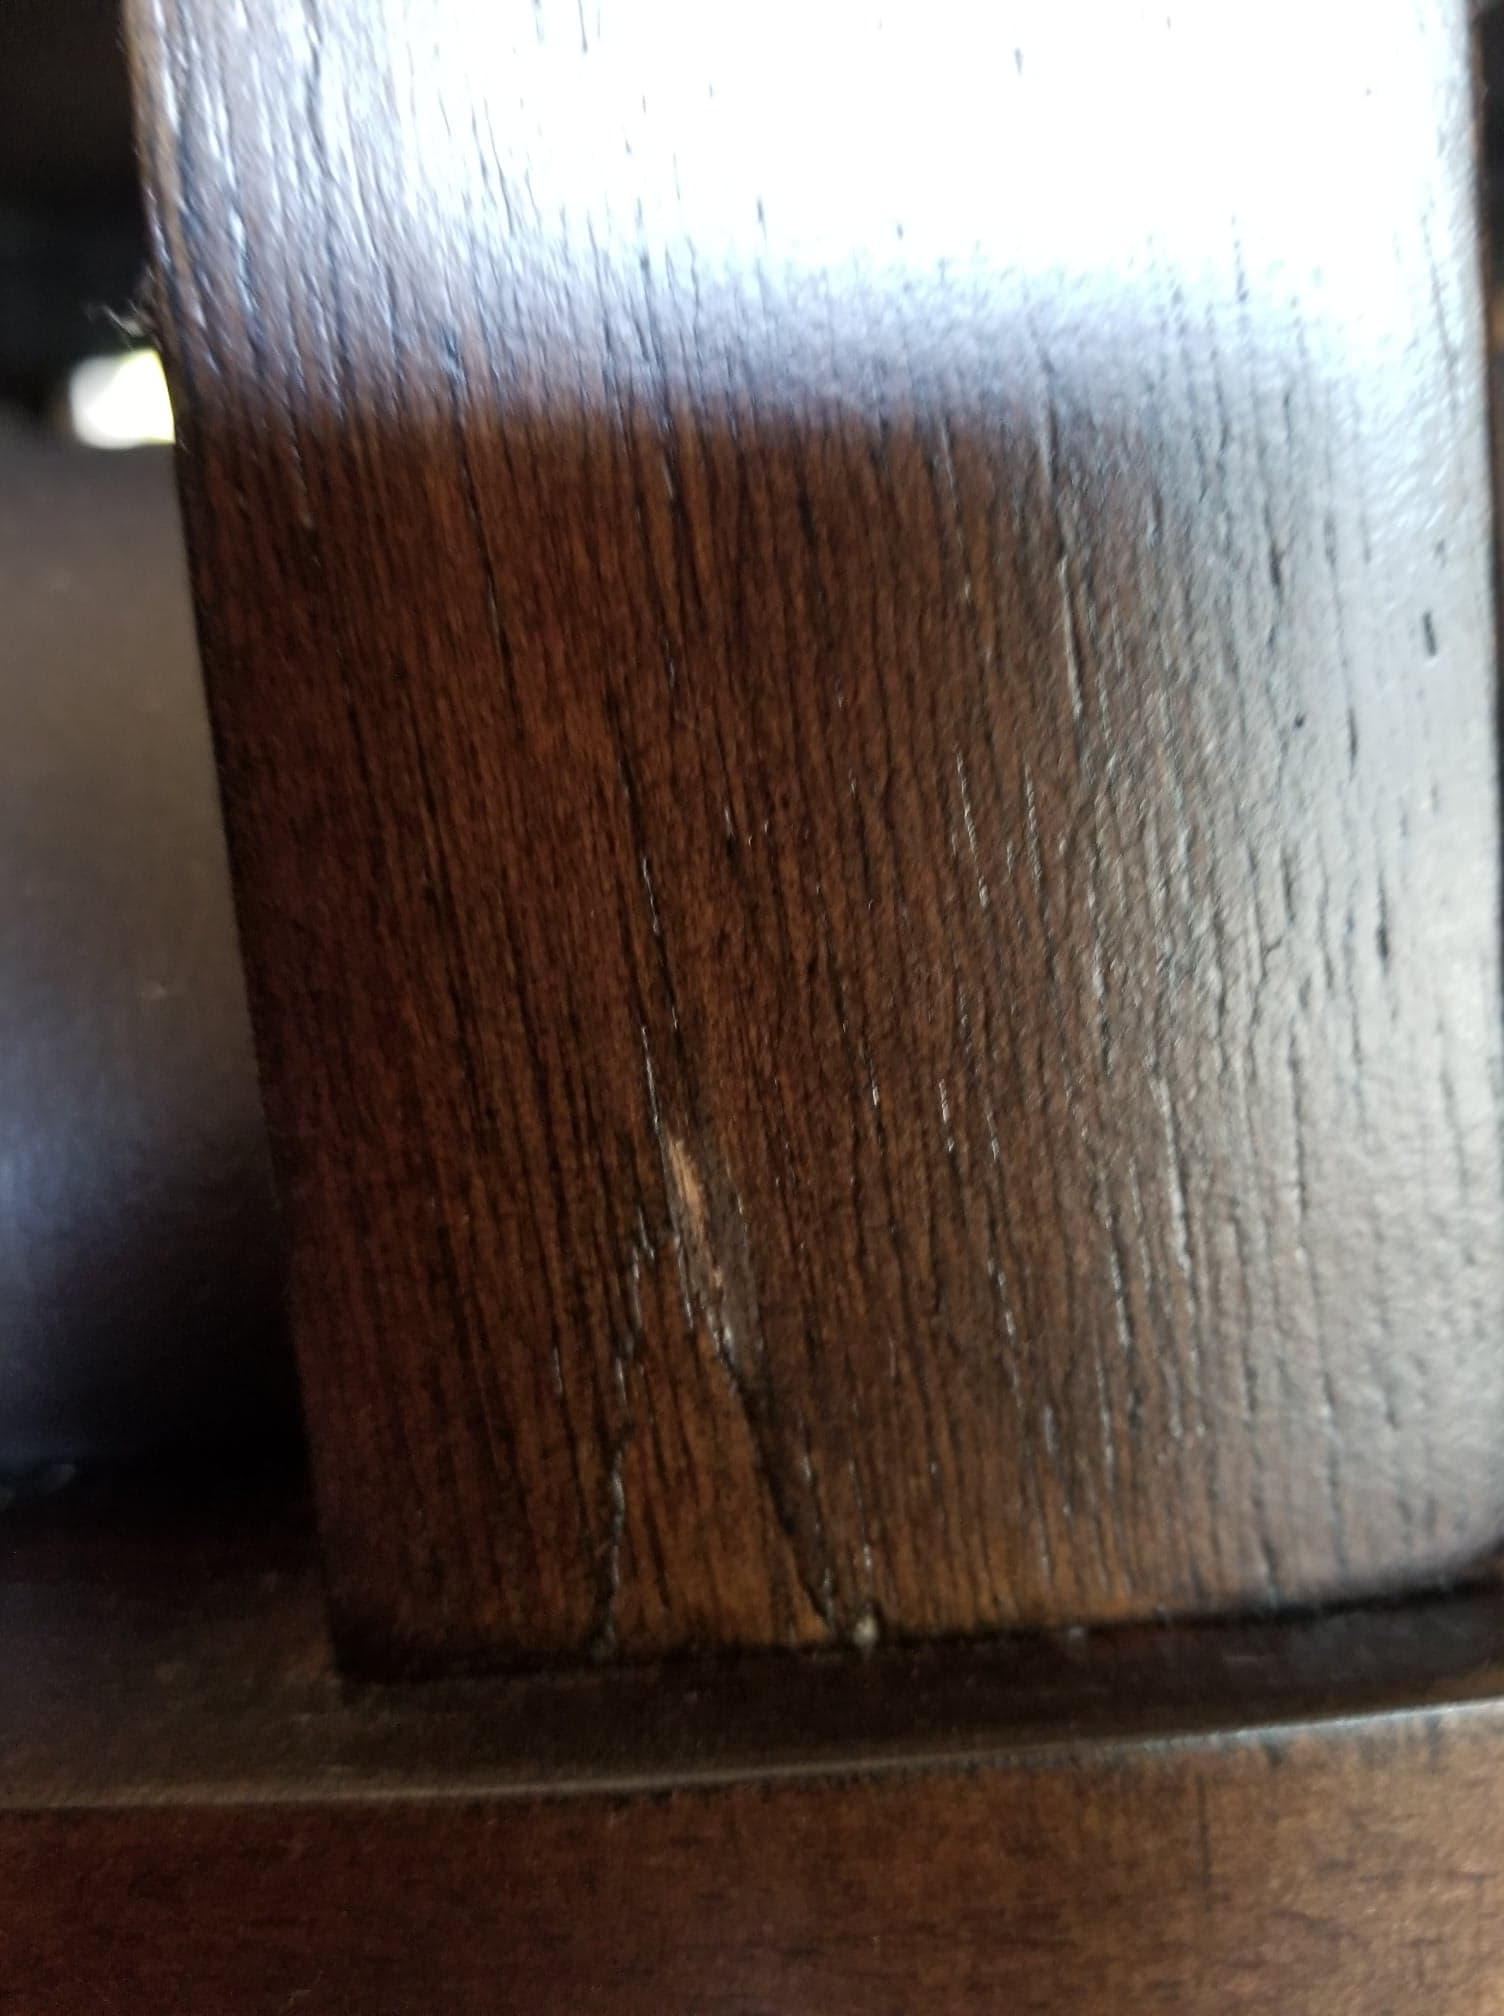 Cracked slat on back of some slats of chairs